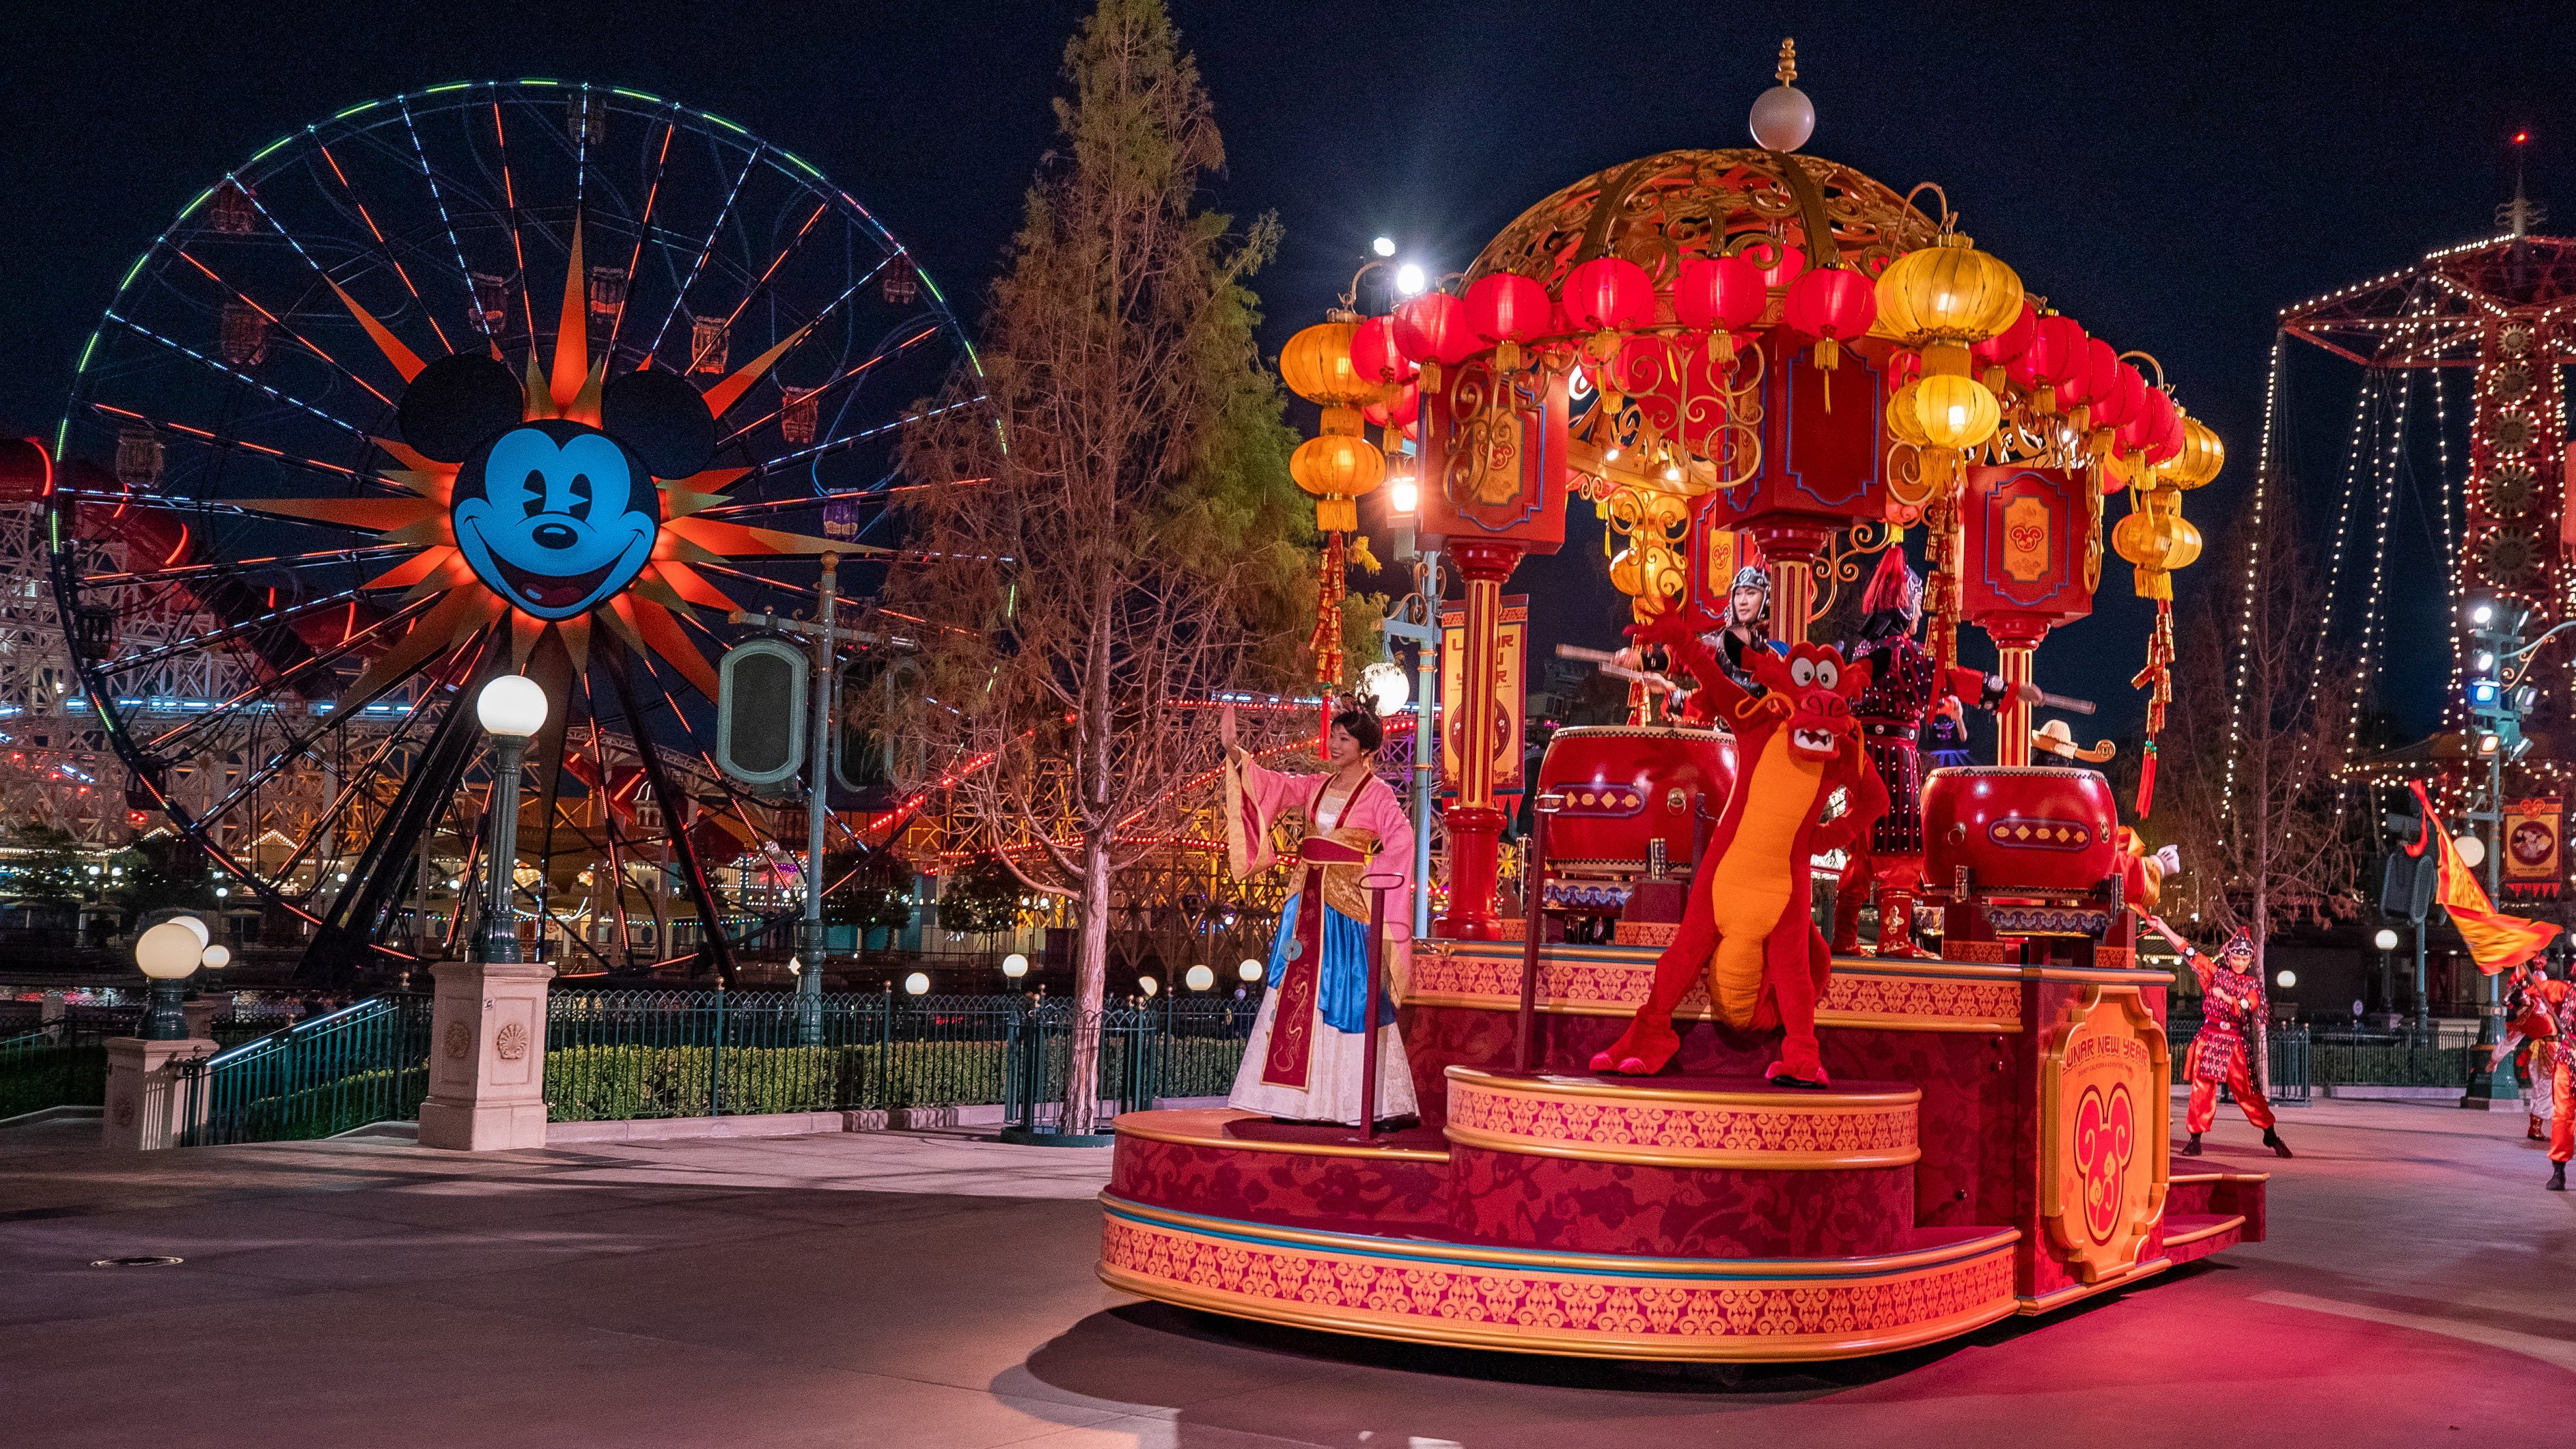 Disneyland Resort Celebrates the Year of the Tiger with the Return of Lunar New Year at Disney California Adventure Park, Jan. 21 to Feb. 13, 2022